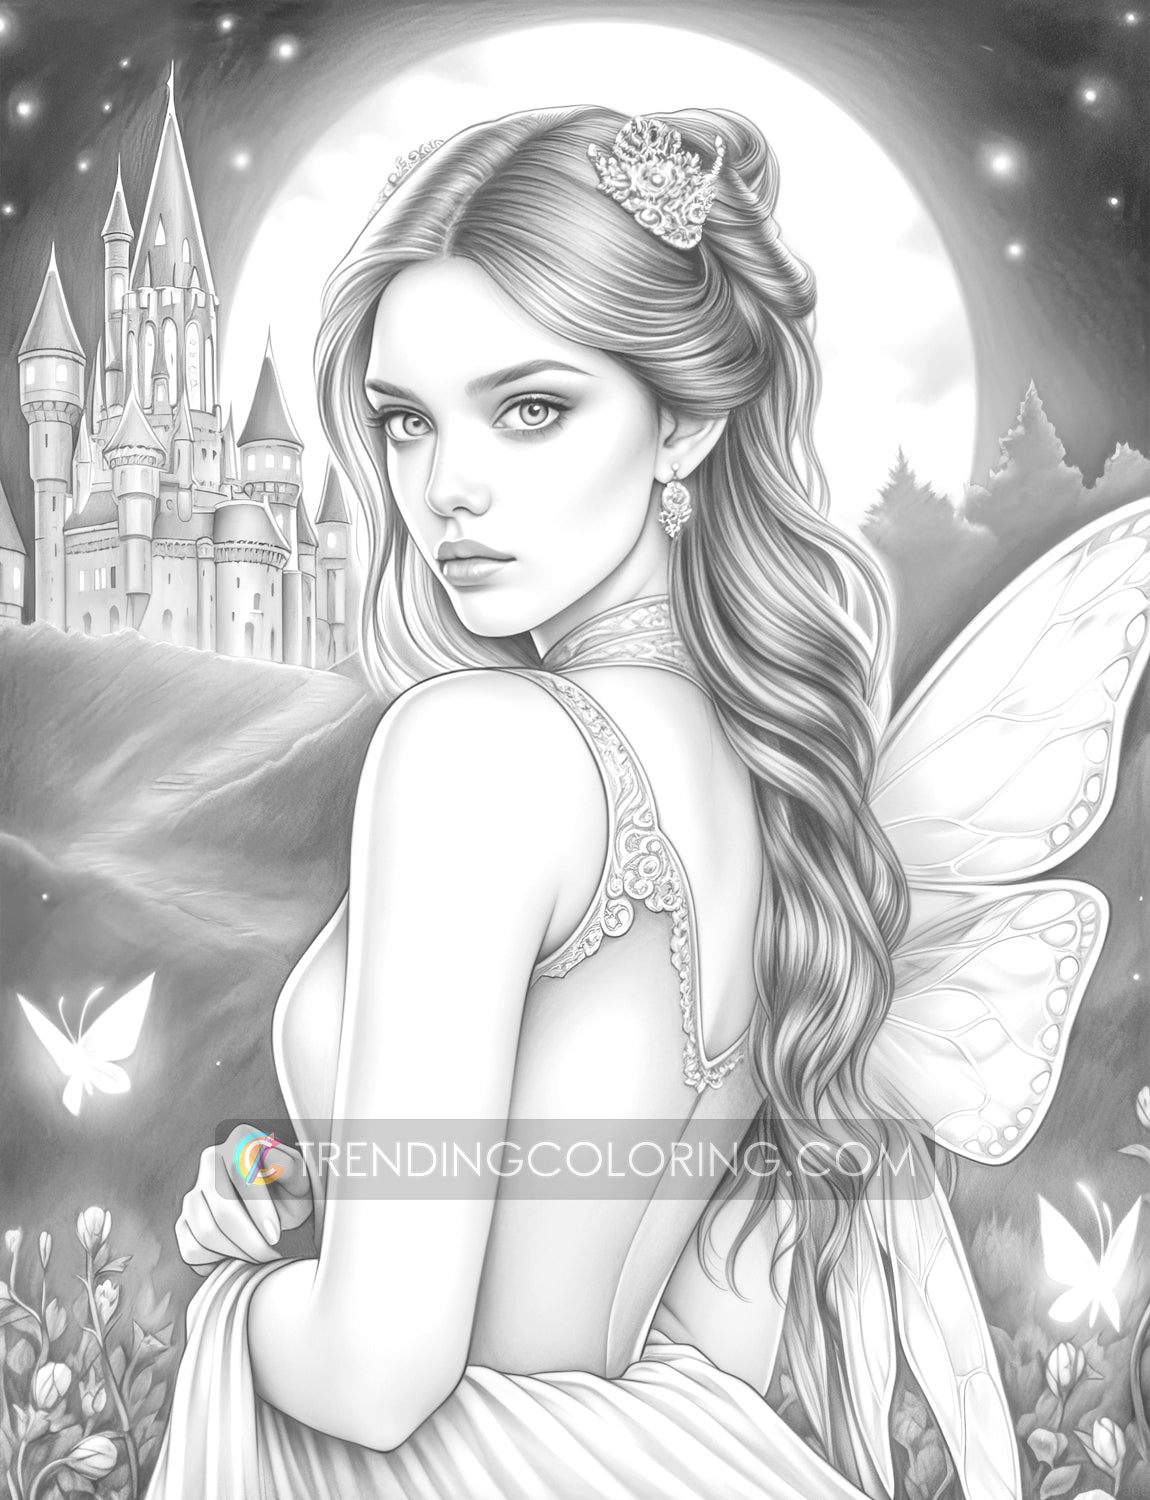 30 Fairy Queen Grayscale Coloring Pages - Instant Download - Printable Dark/Light